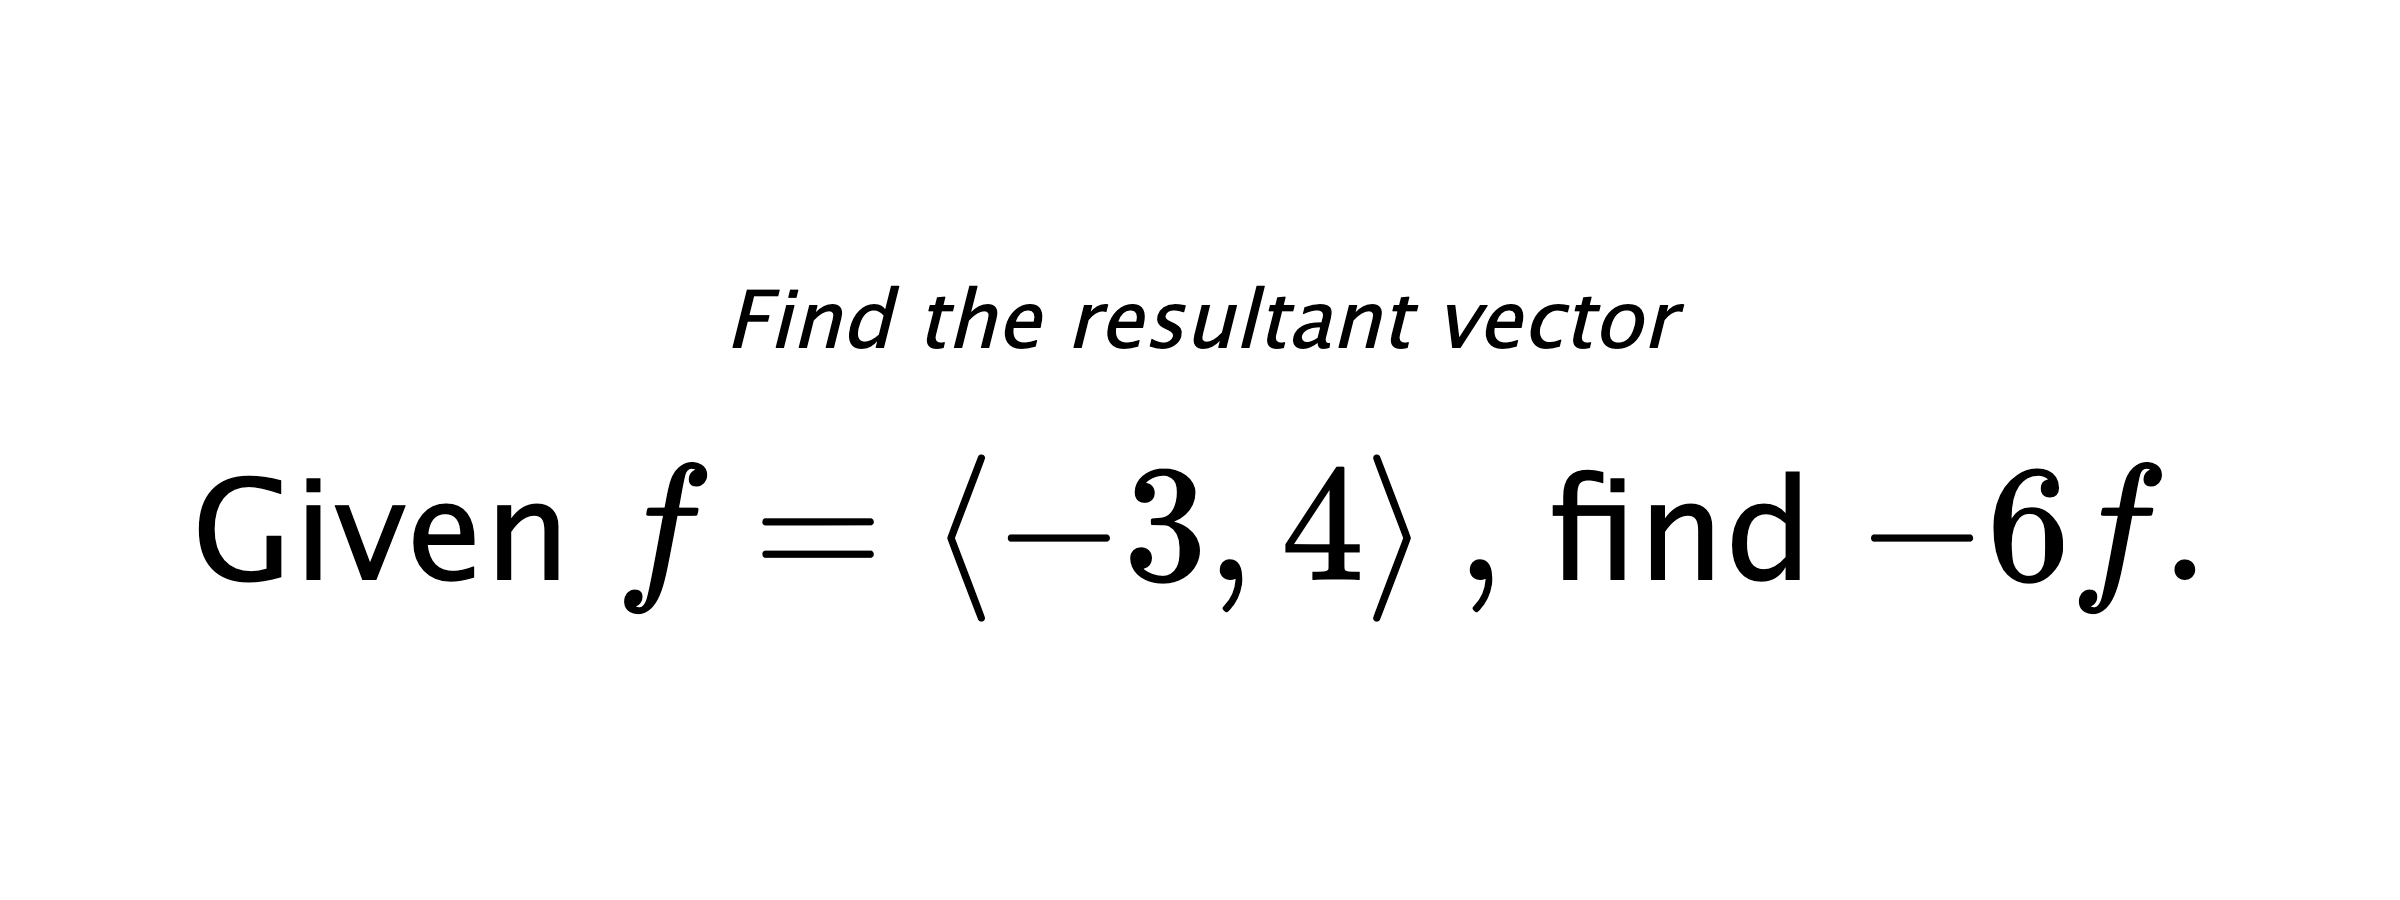 Find the resultant vector Given $ f = \left< -3,4 \right> ,$ find $ -6f .$